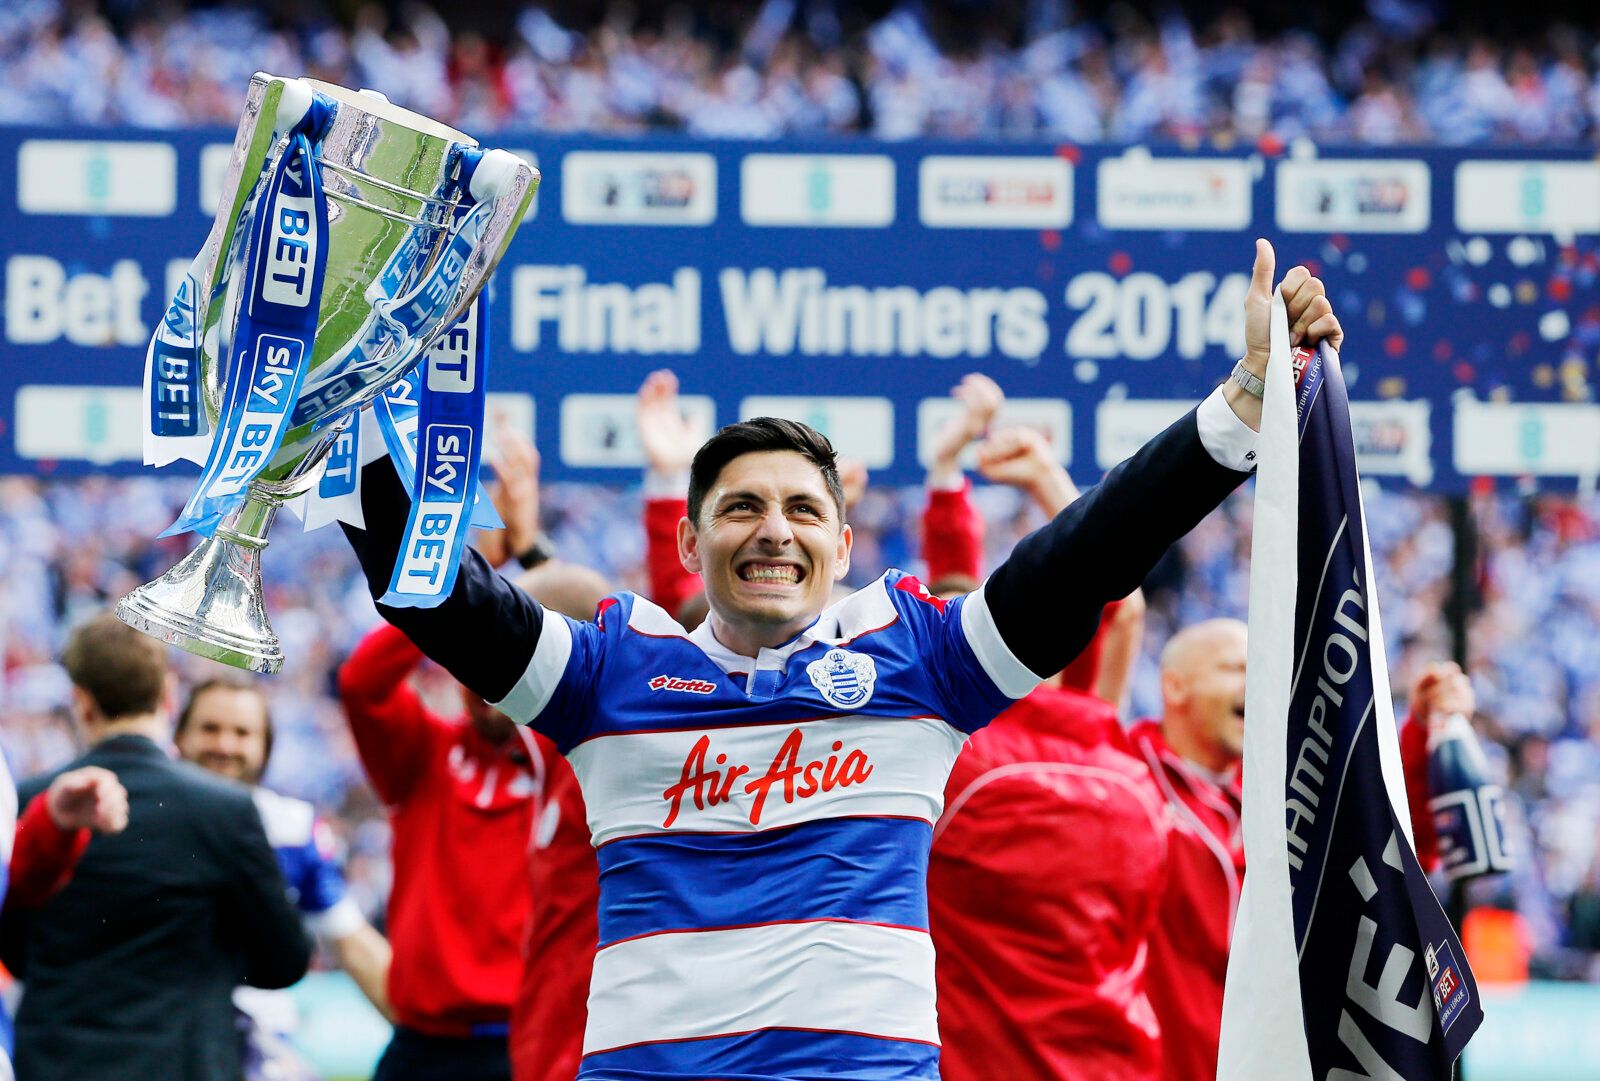 Football - Derby County v Queens Park Rangers - Sky Bet Football League Championship Play-Off Final - Wembley Stadium - 24/5/14 
QPR's Alejandro Faurlin celebrates with the trophy after winning the Football League Championship Play Off Final 
Mandatory Credit: Action Images / Andrew Couldridge 
Livepic 
EDITORIAL USE ONLY. No use with unauthorized audio, video, data, fixture lists, club/league logos or 